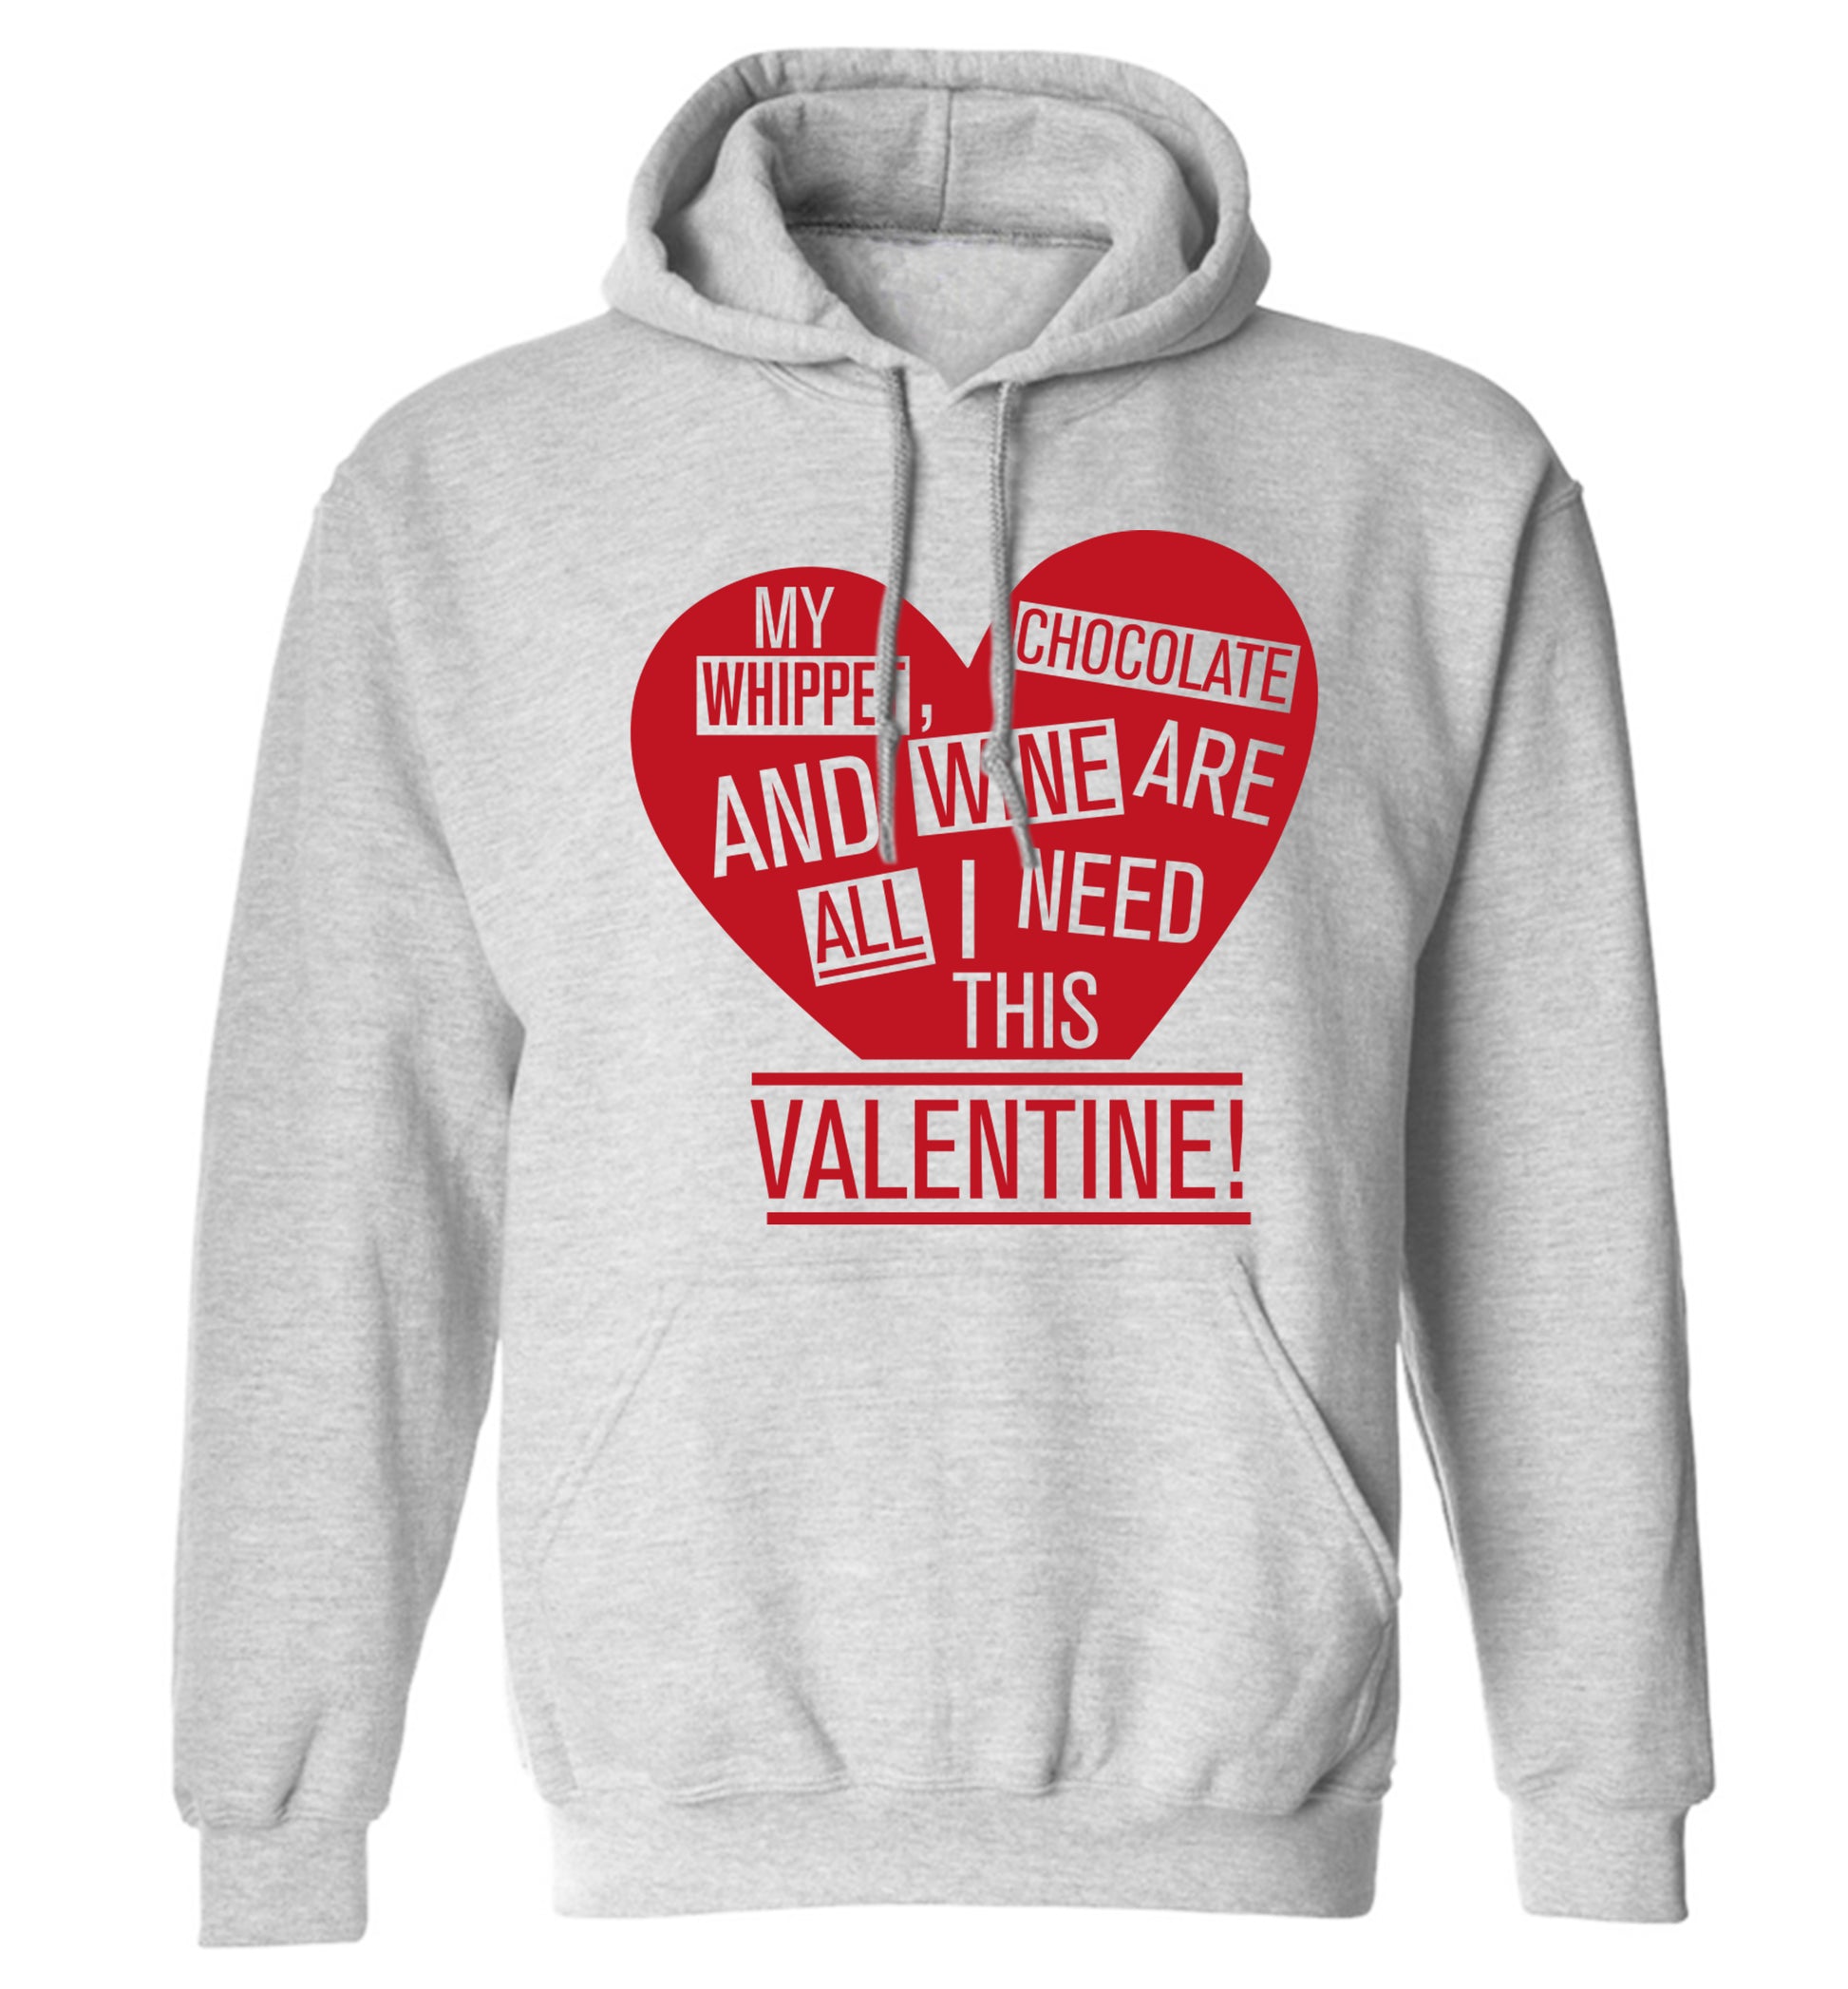 My whippet, chocolate and wine are all I need this valentine! adults unisex grey hoodie 2XL